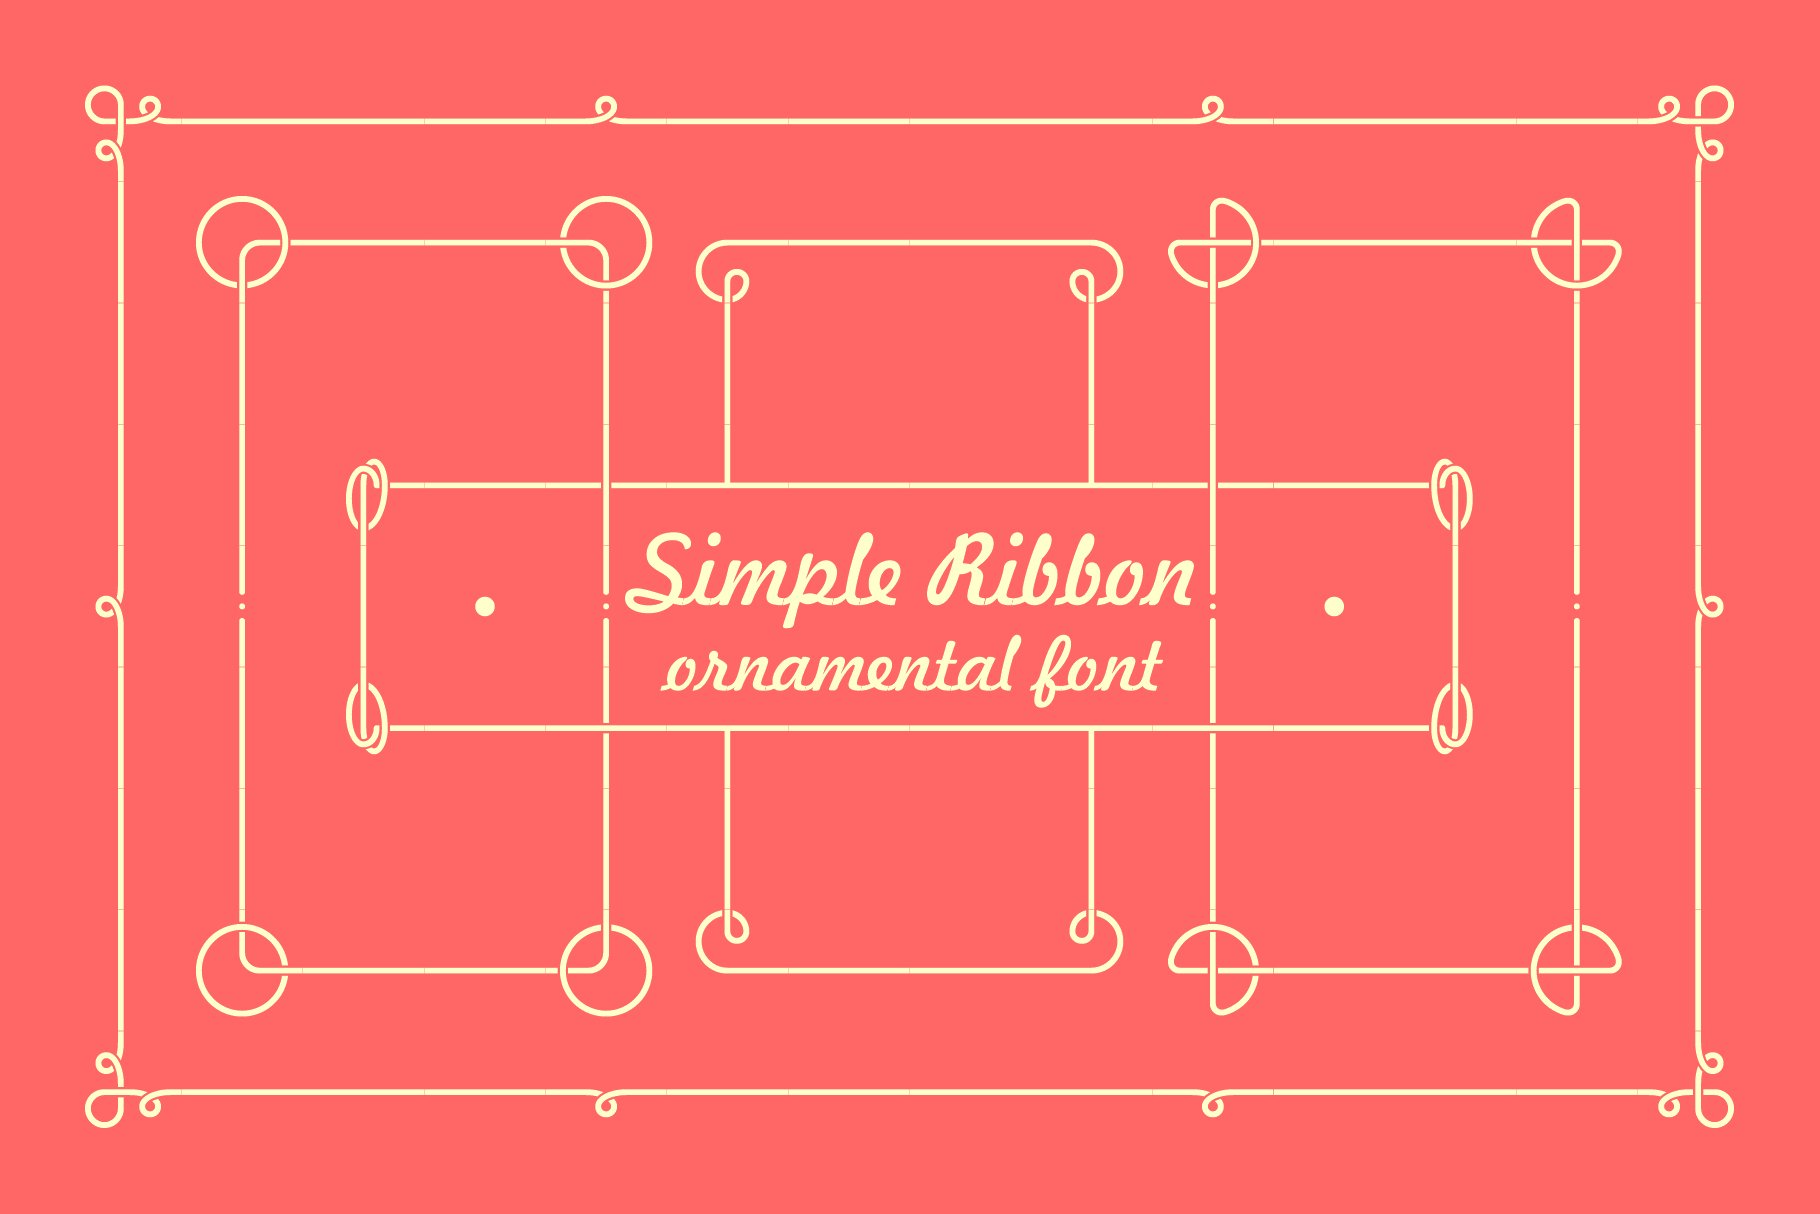 Simple Ribbon cover image.